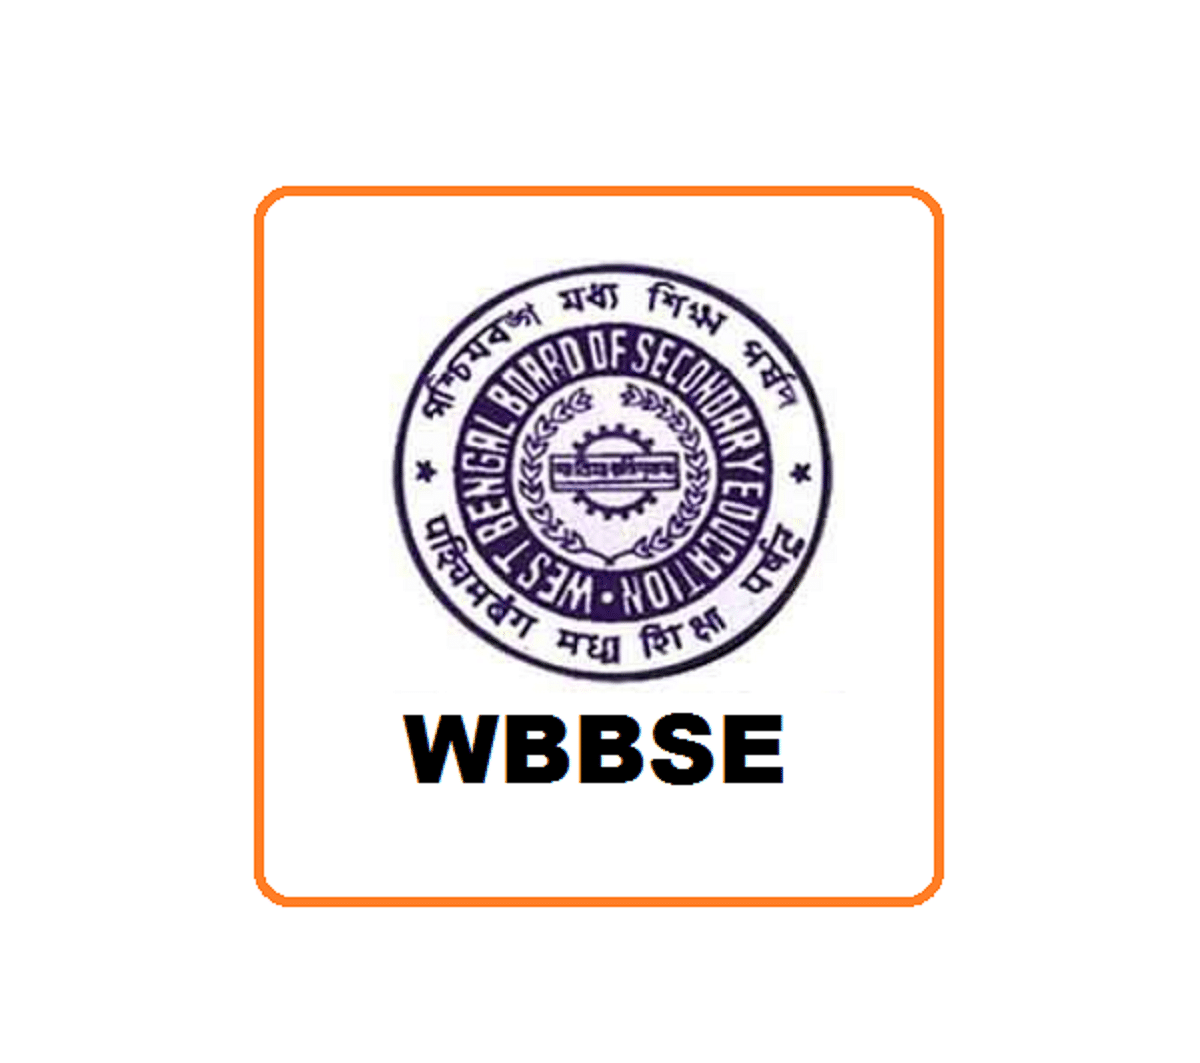 WBBSE Class 10th & 12th Board Exams 2021 Cancelled, Official Updates Here